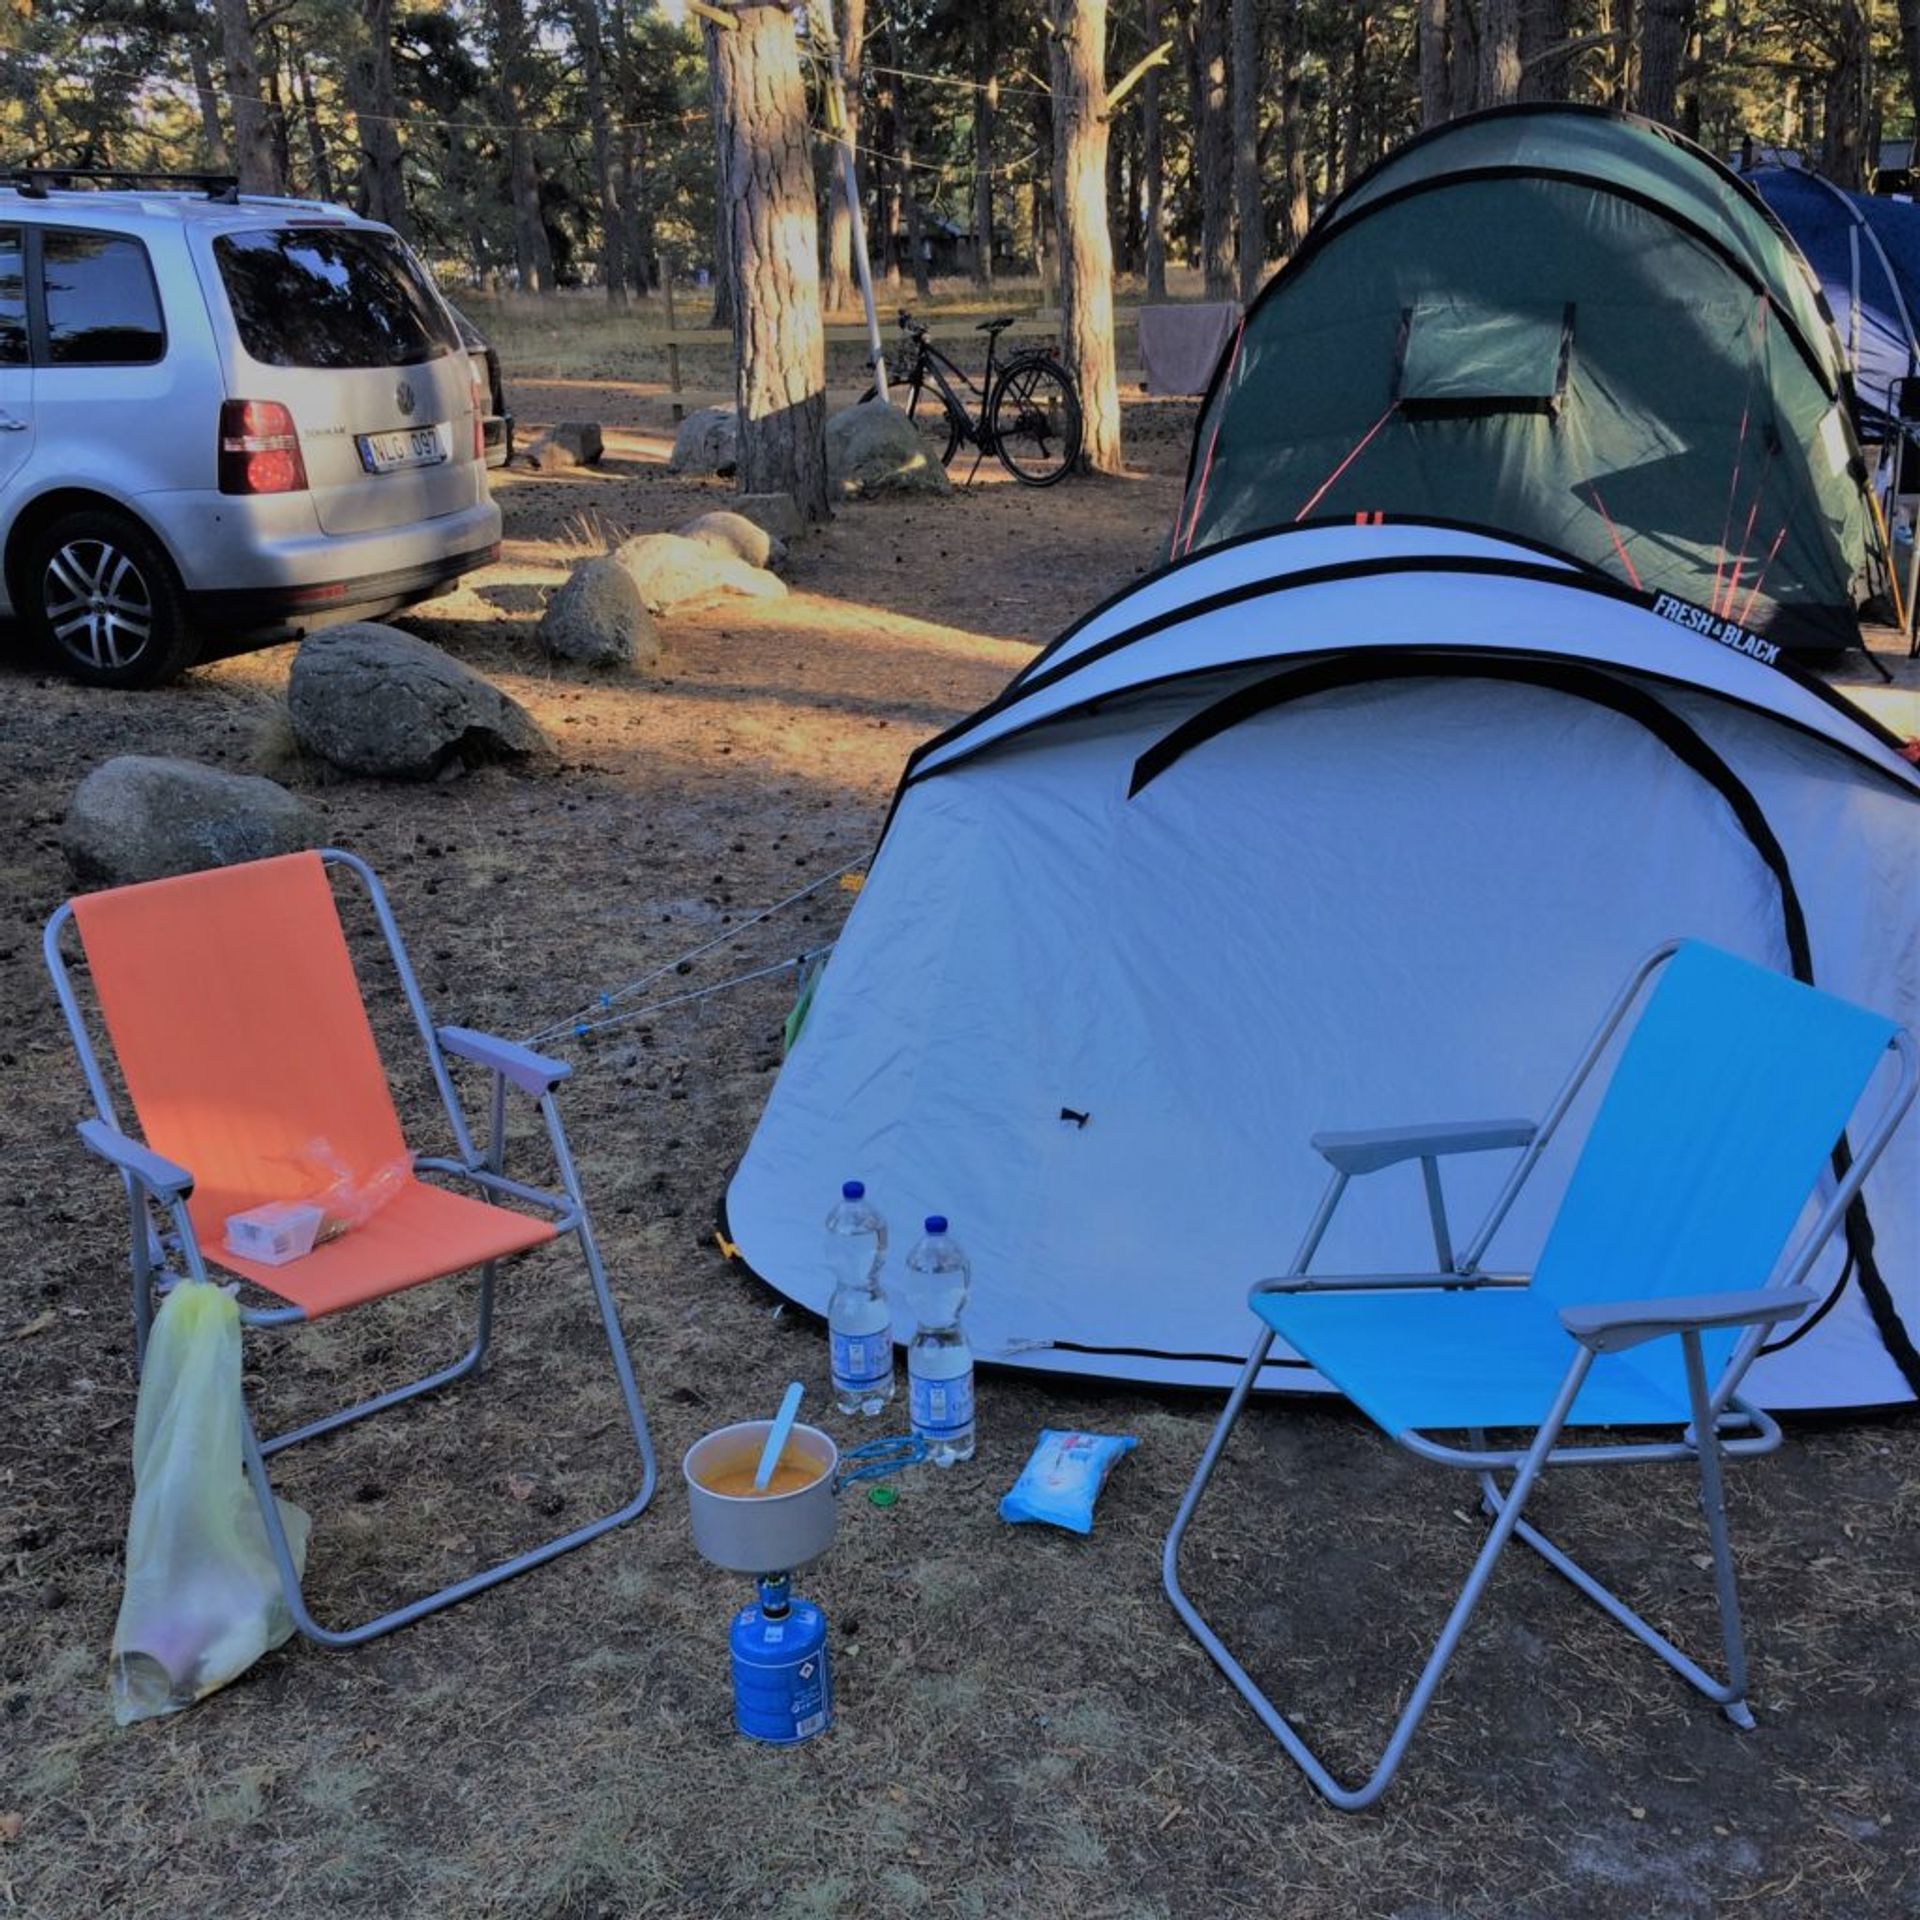 Tent and chair on a camping spot.